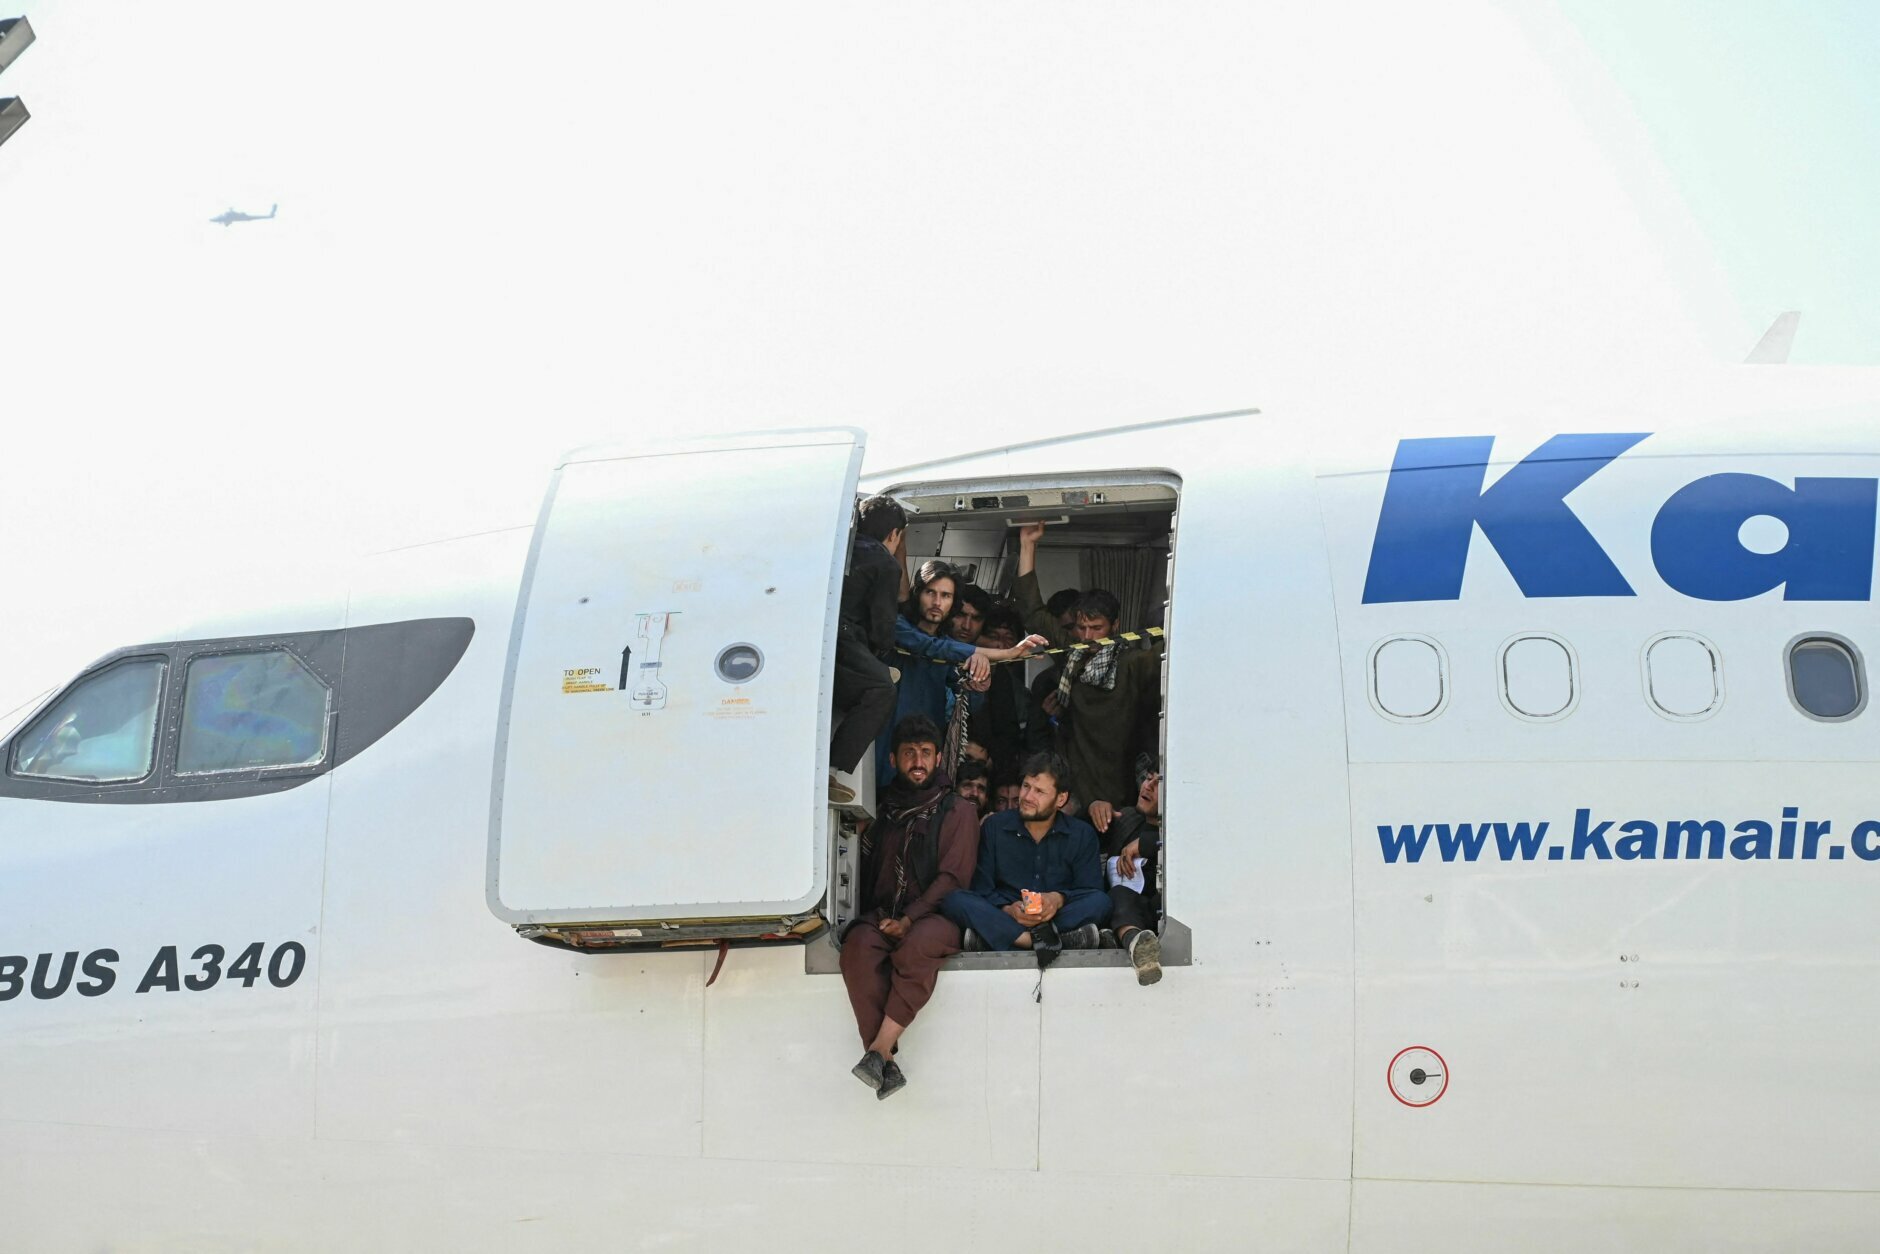 TOPSHOT - Afghan people climb up on a plane and sit by the door as they wait at the Kabul airport in Kabul on August 16, 2021, after a stunningly swift end to Afghanistan's 20-year war, as thousands of people mobbed the city's airport trying to flee the group's feared hardline brand of Islamist rule. (Photo by Wakil Kohsar / AFP) (Photo by WAKIL KOHSAR/AFP via Getty Images)